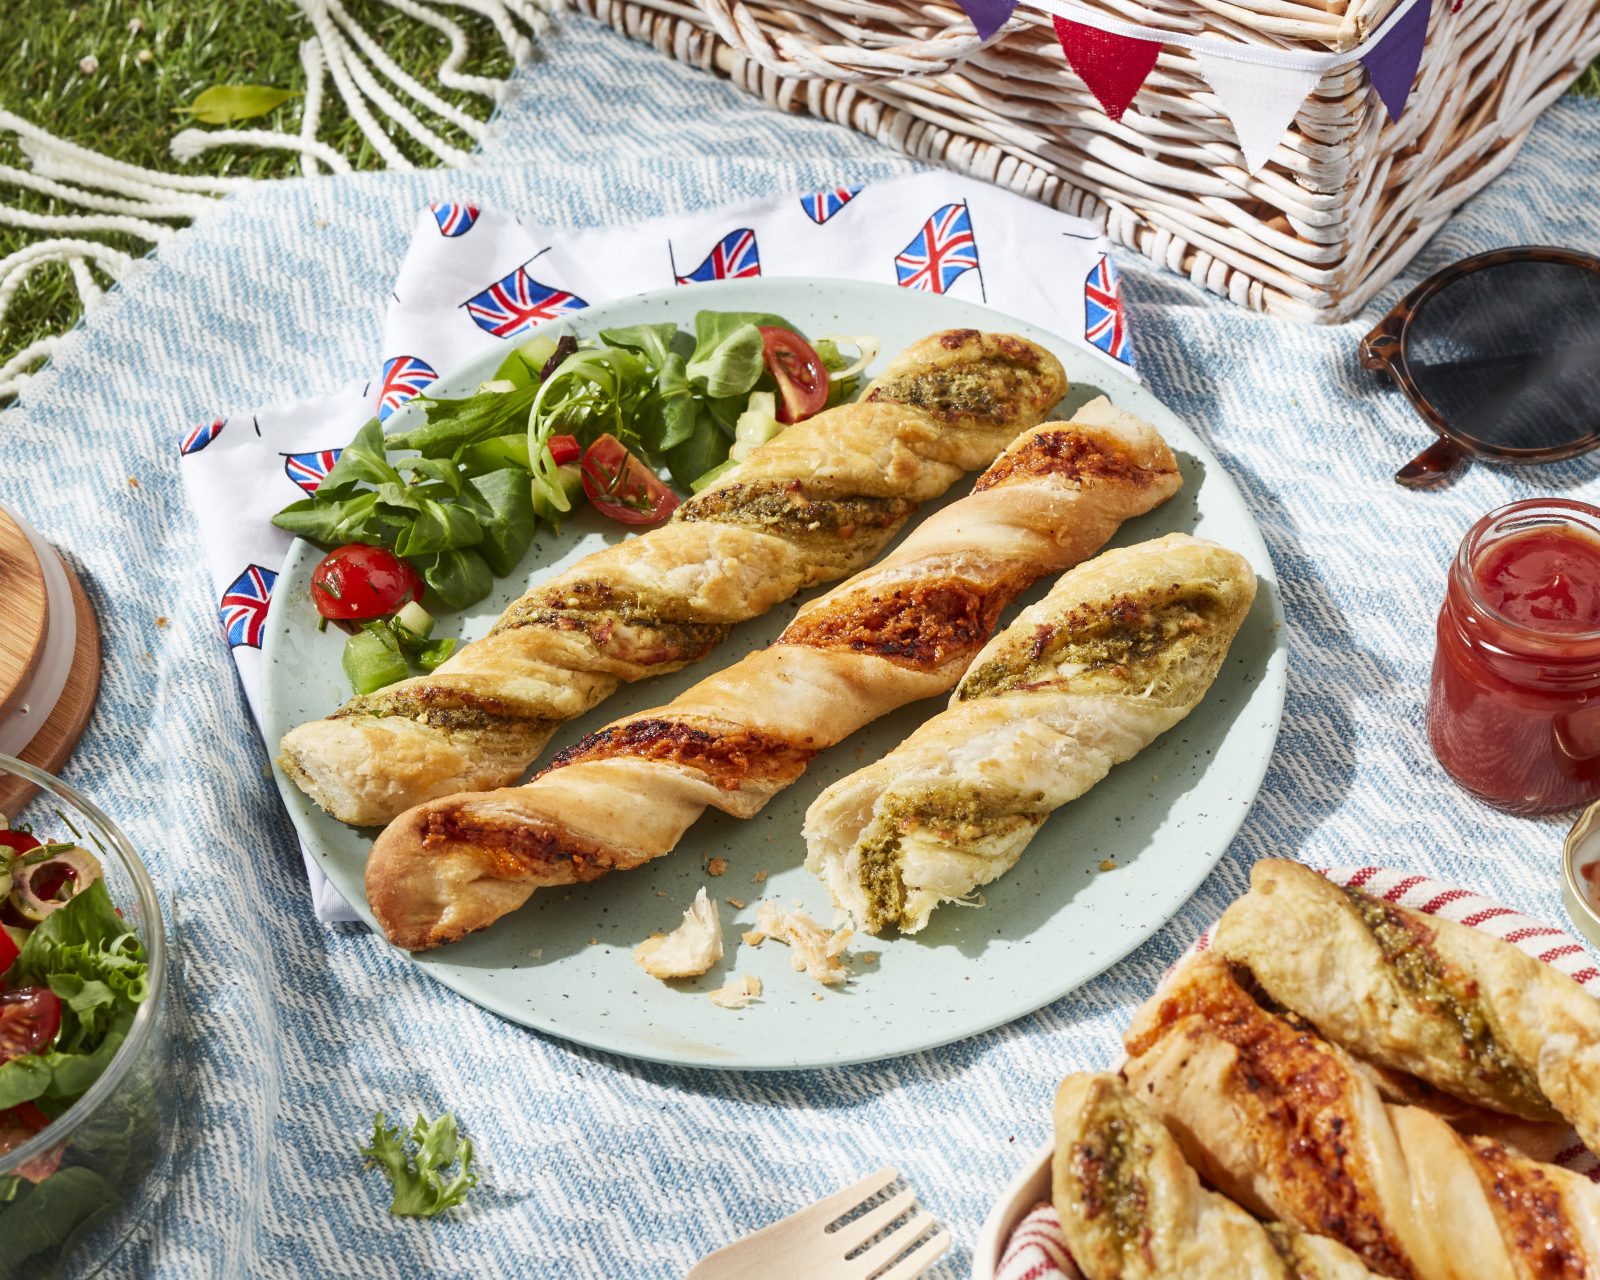 Iceland has launched a ‘Jubilee Lunch’ range with street party food from £1, The Manc